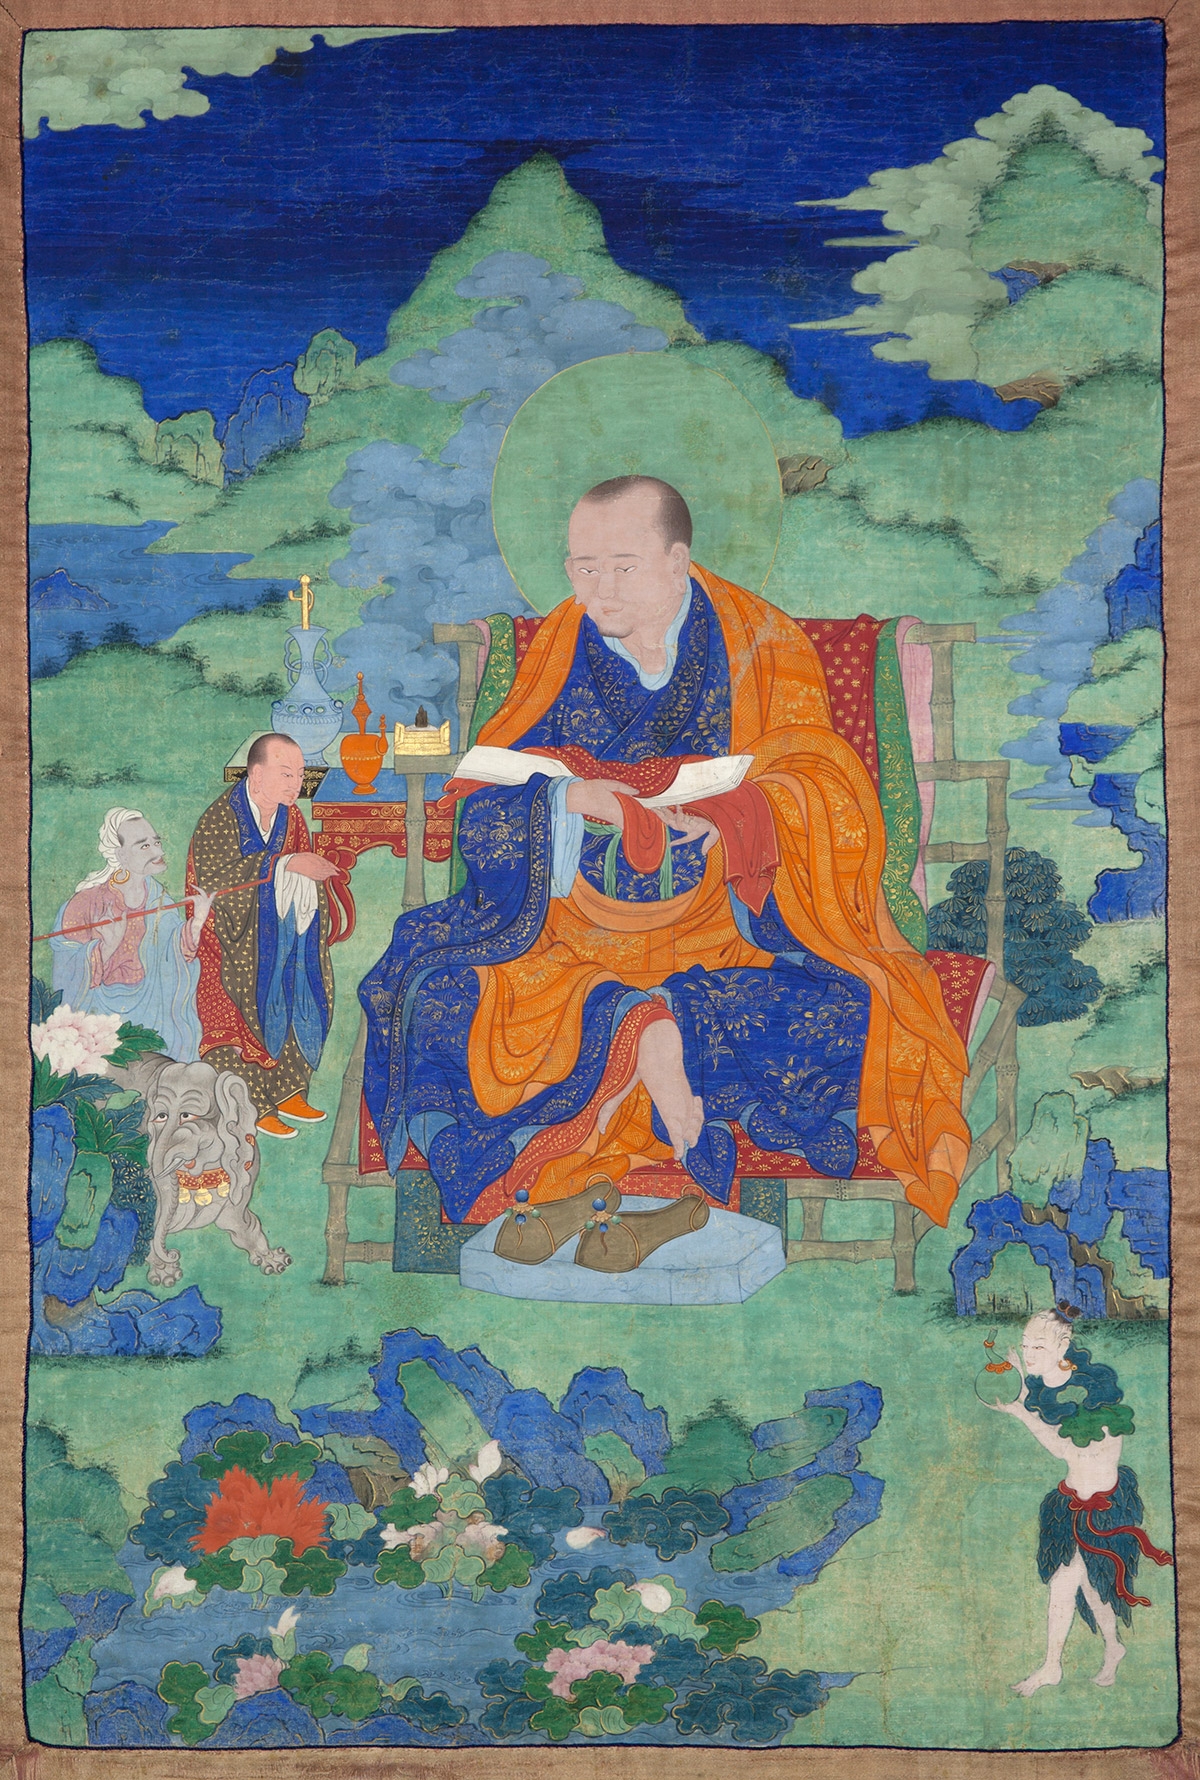 Panthaka Arhat. 17th century. Possibly Kham (East Tibet). Tradition: Gelug. Pigments on cloth. MU-CIV/MAO "Giuseppe Tucci," inv. 932/765. Placement as indicated on verso: 7th from left. Image courtesy of the Museum of Civilisation/Museum of Oriental Art "Giuseppe Tucci," Rome.